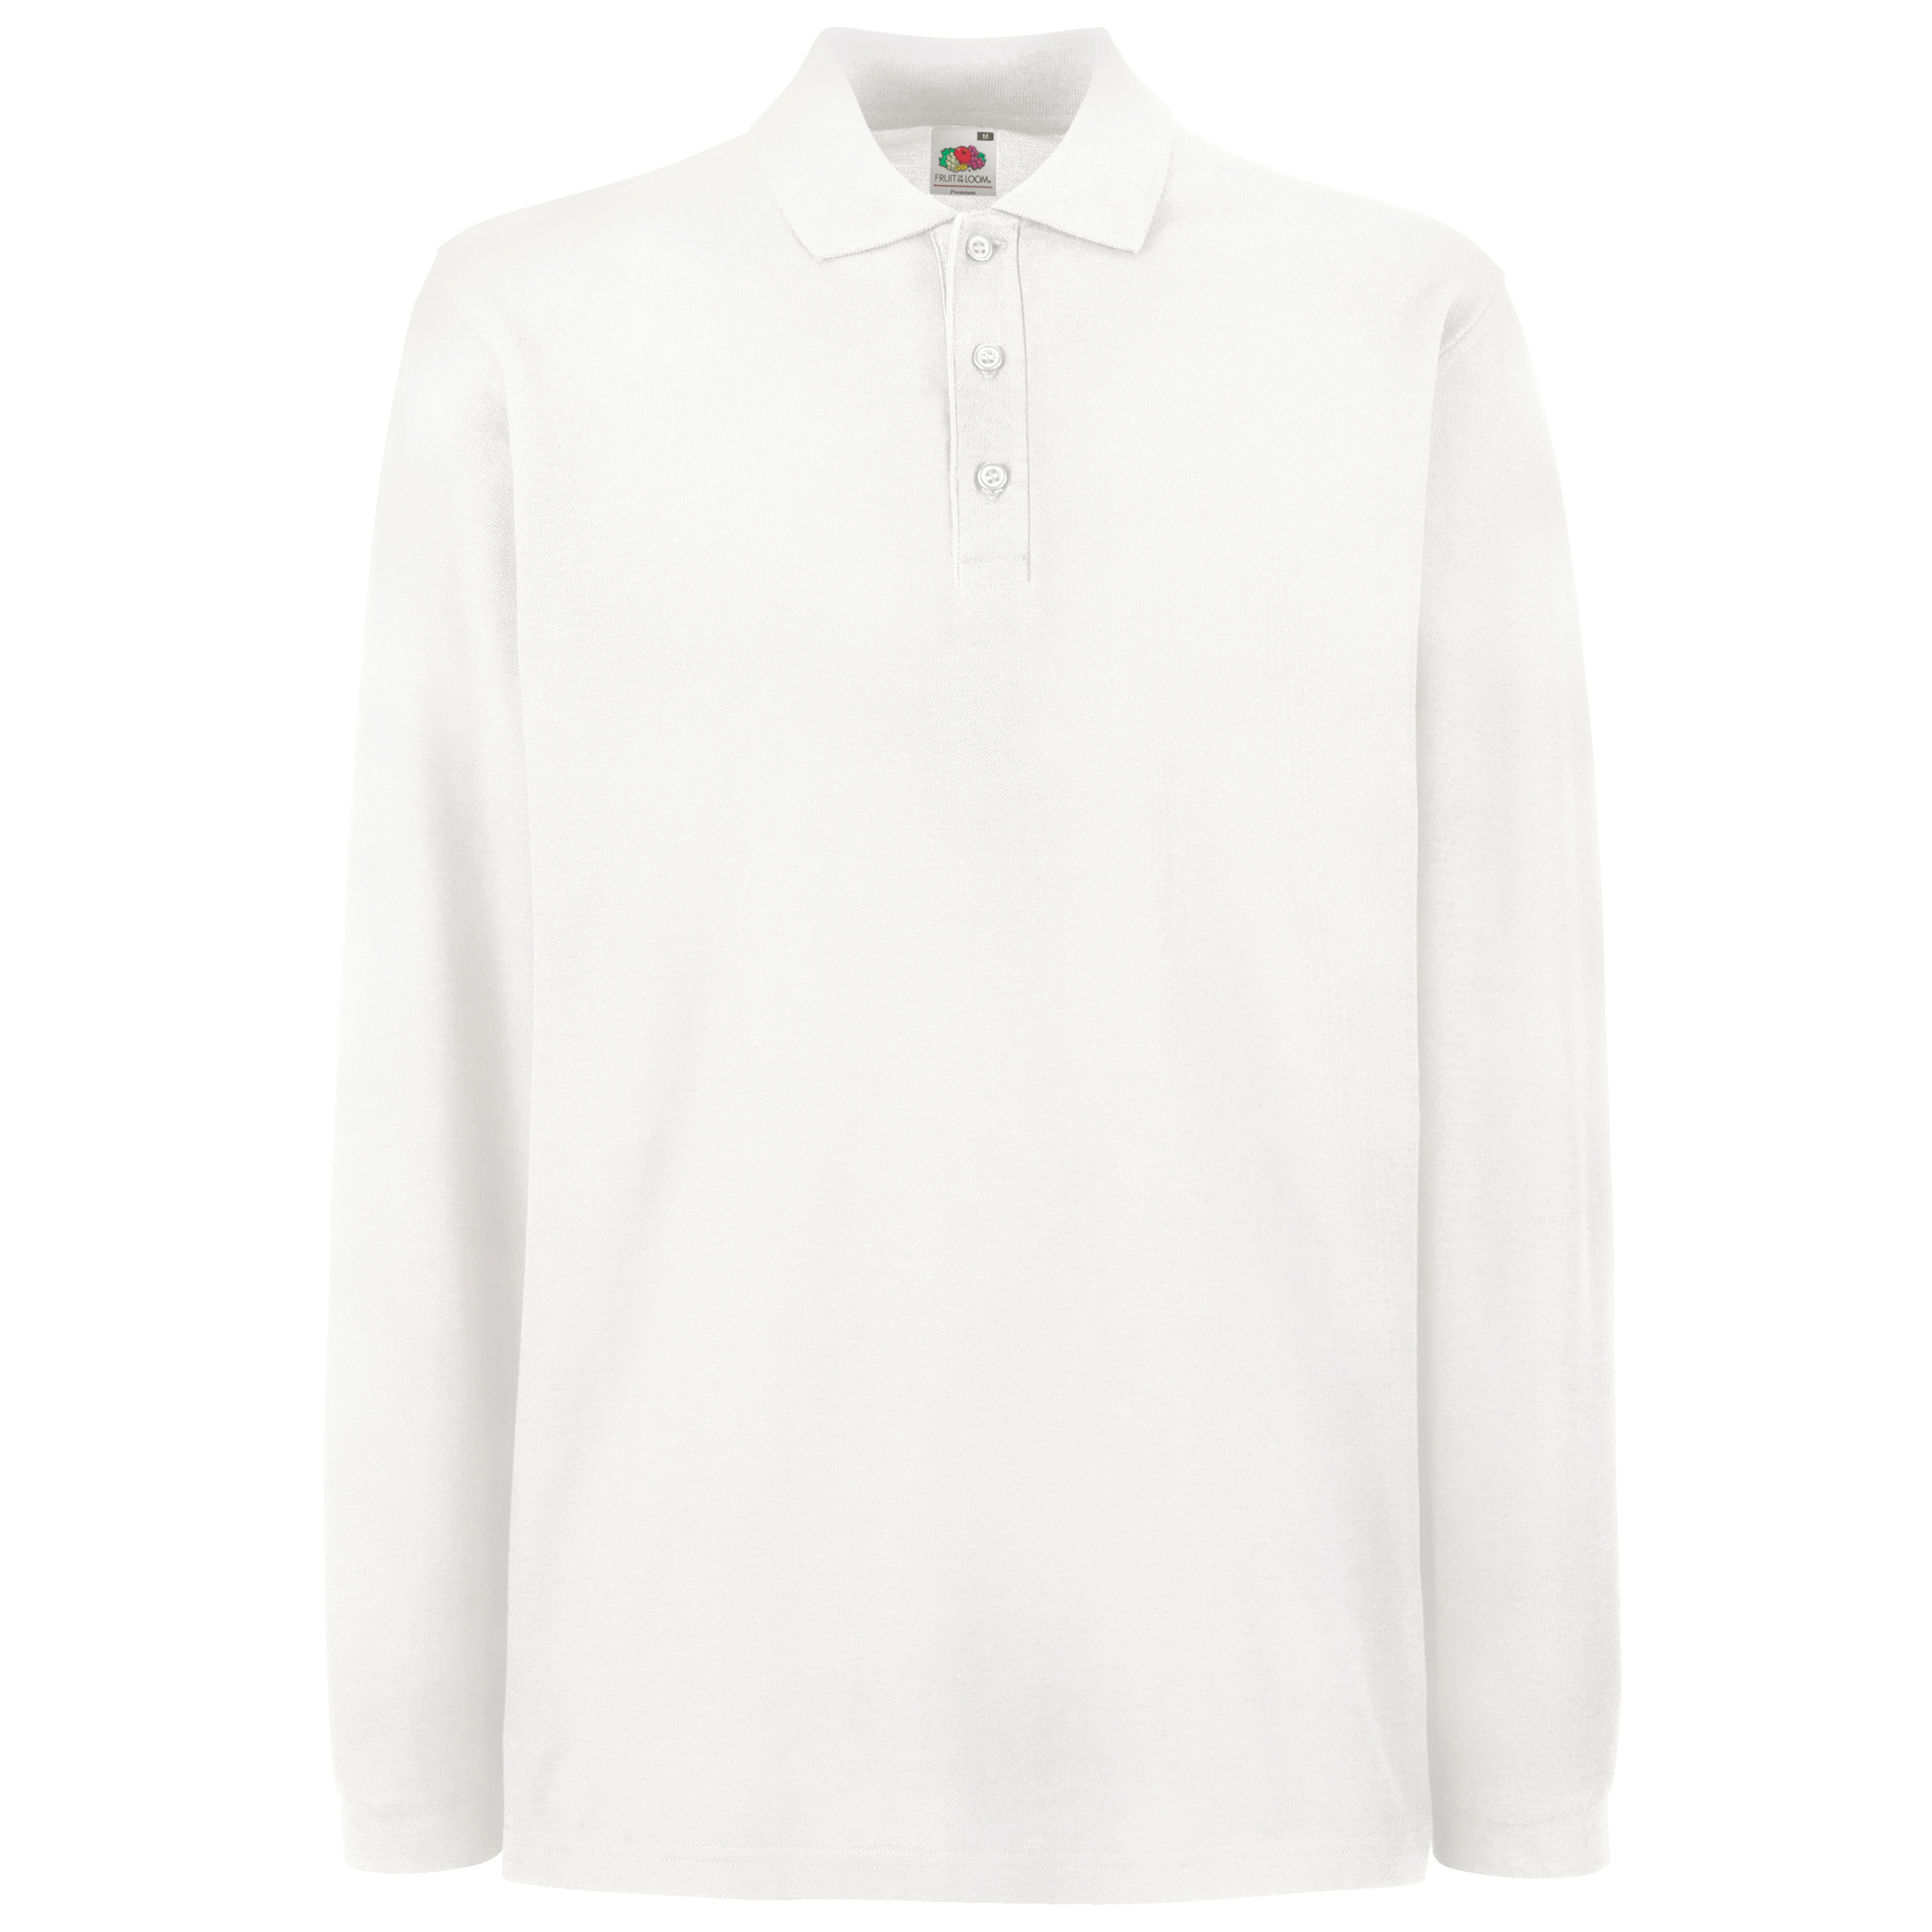 ax-httpswebsystems.s3.amazonaws.comtmp_for_downloadfruit-of-the-loom-long-sleeve-polo-white.jpg